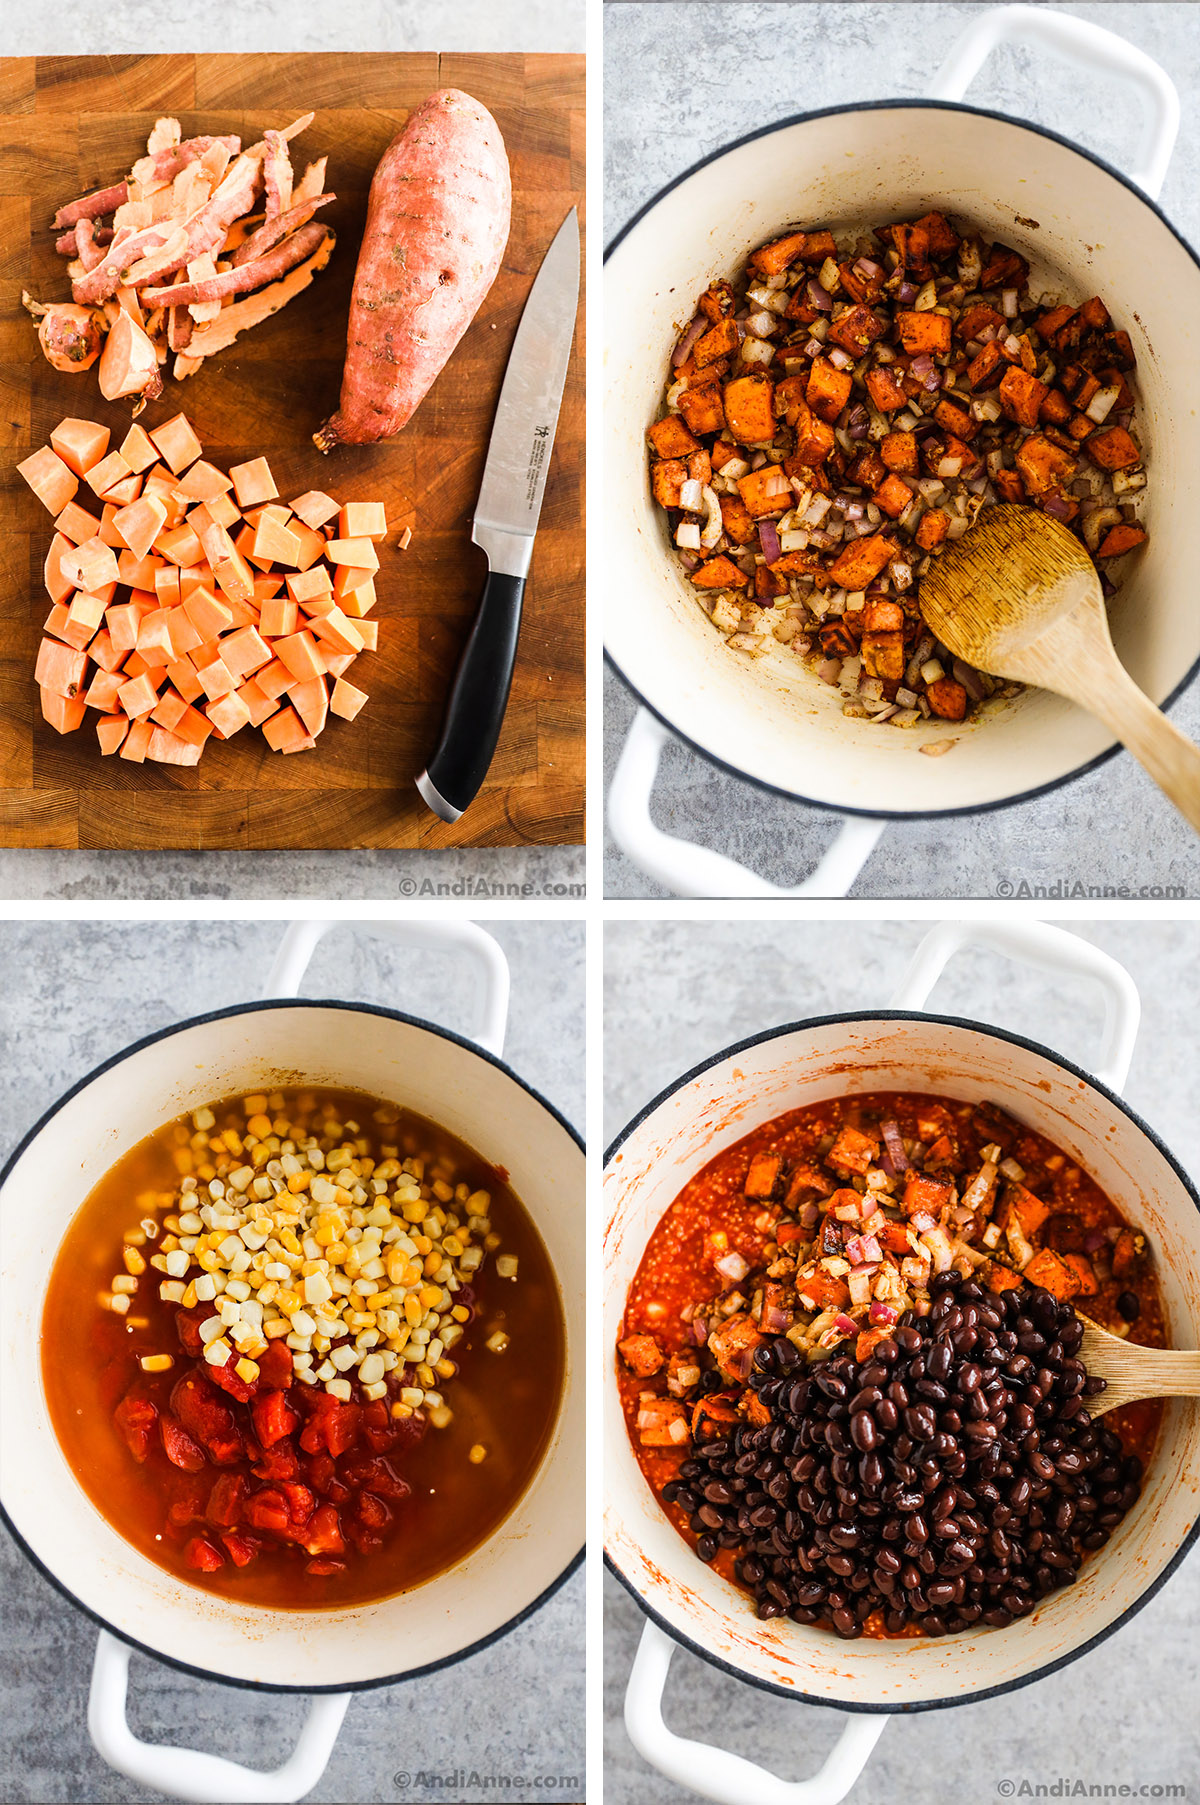 Four images of steps to make recipe. First is chopped sweet potatoes on cutting board with knife. Second is cooked sweet potato and onion in spices in a pot. Third is frozen corn and diced tomatoes with liquid in a white pot. Fourth is black beans and cooked sweet potato in liquid in white pot. 